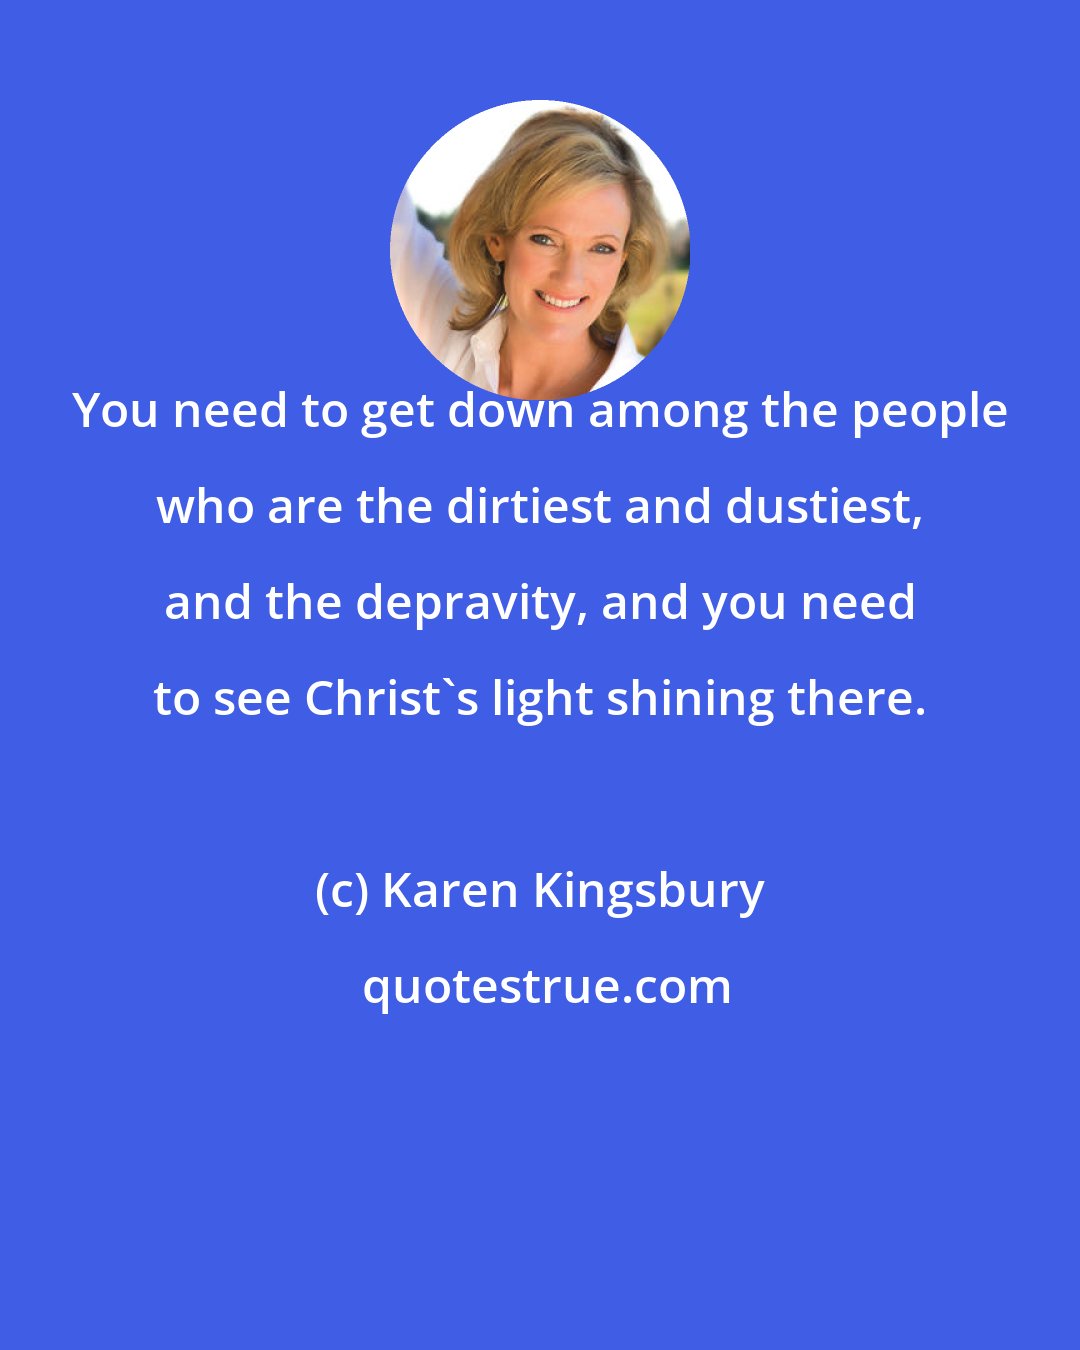 Karen Kingsbury: You need to get down among the people who are the dirtiest and dustiest, and the depravity, and you need to see Christ's light shining there.